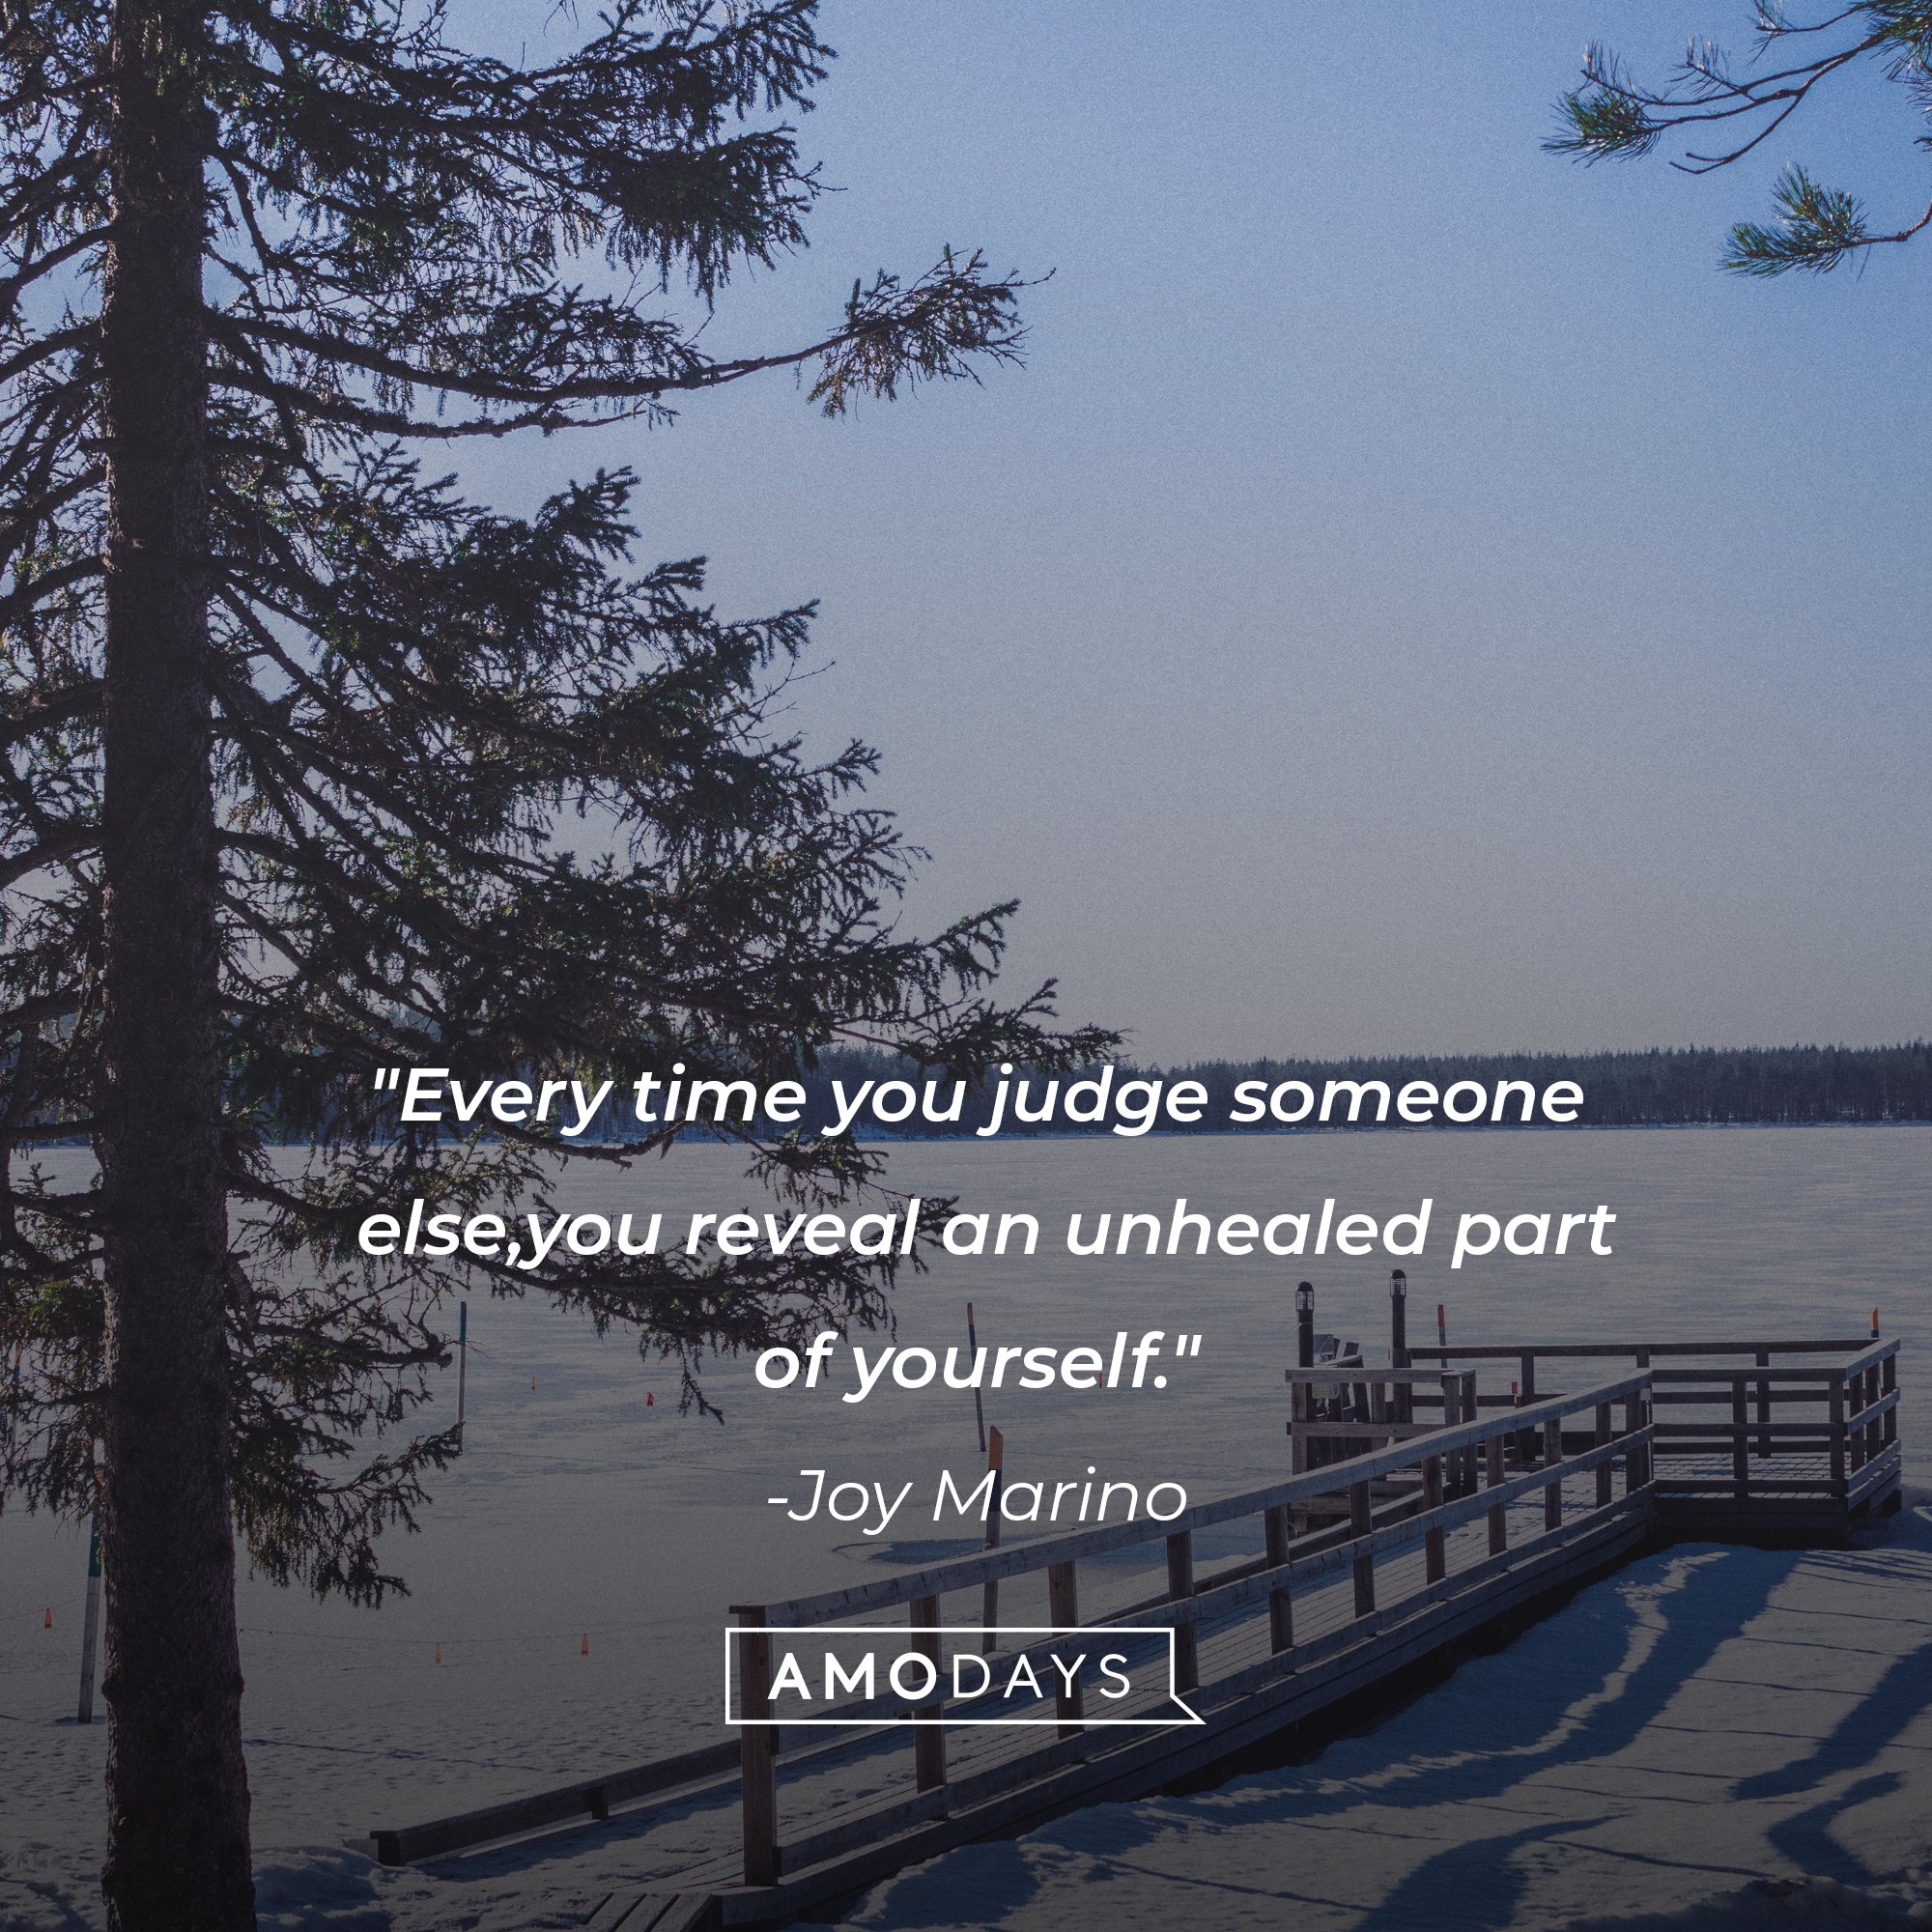 Joy Marino’s quote: "Every time you judge someone else, you reveal an unhealed part of yourself." | Image: AmoDays   